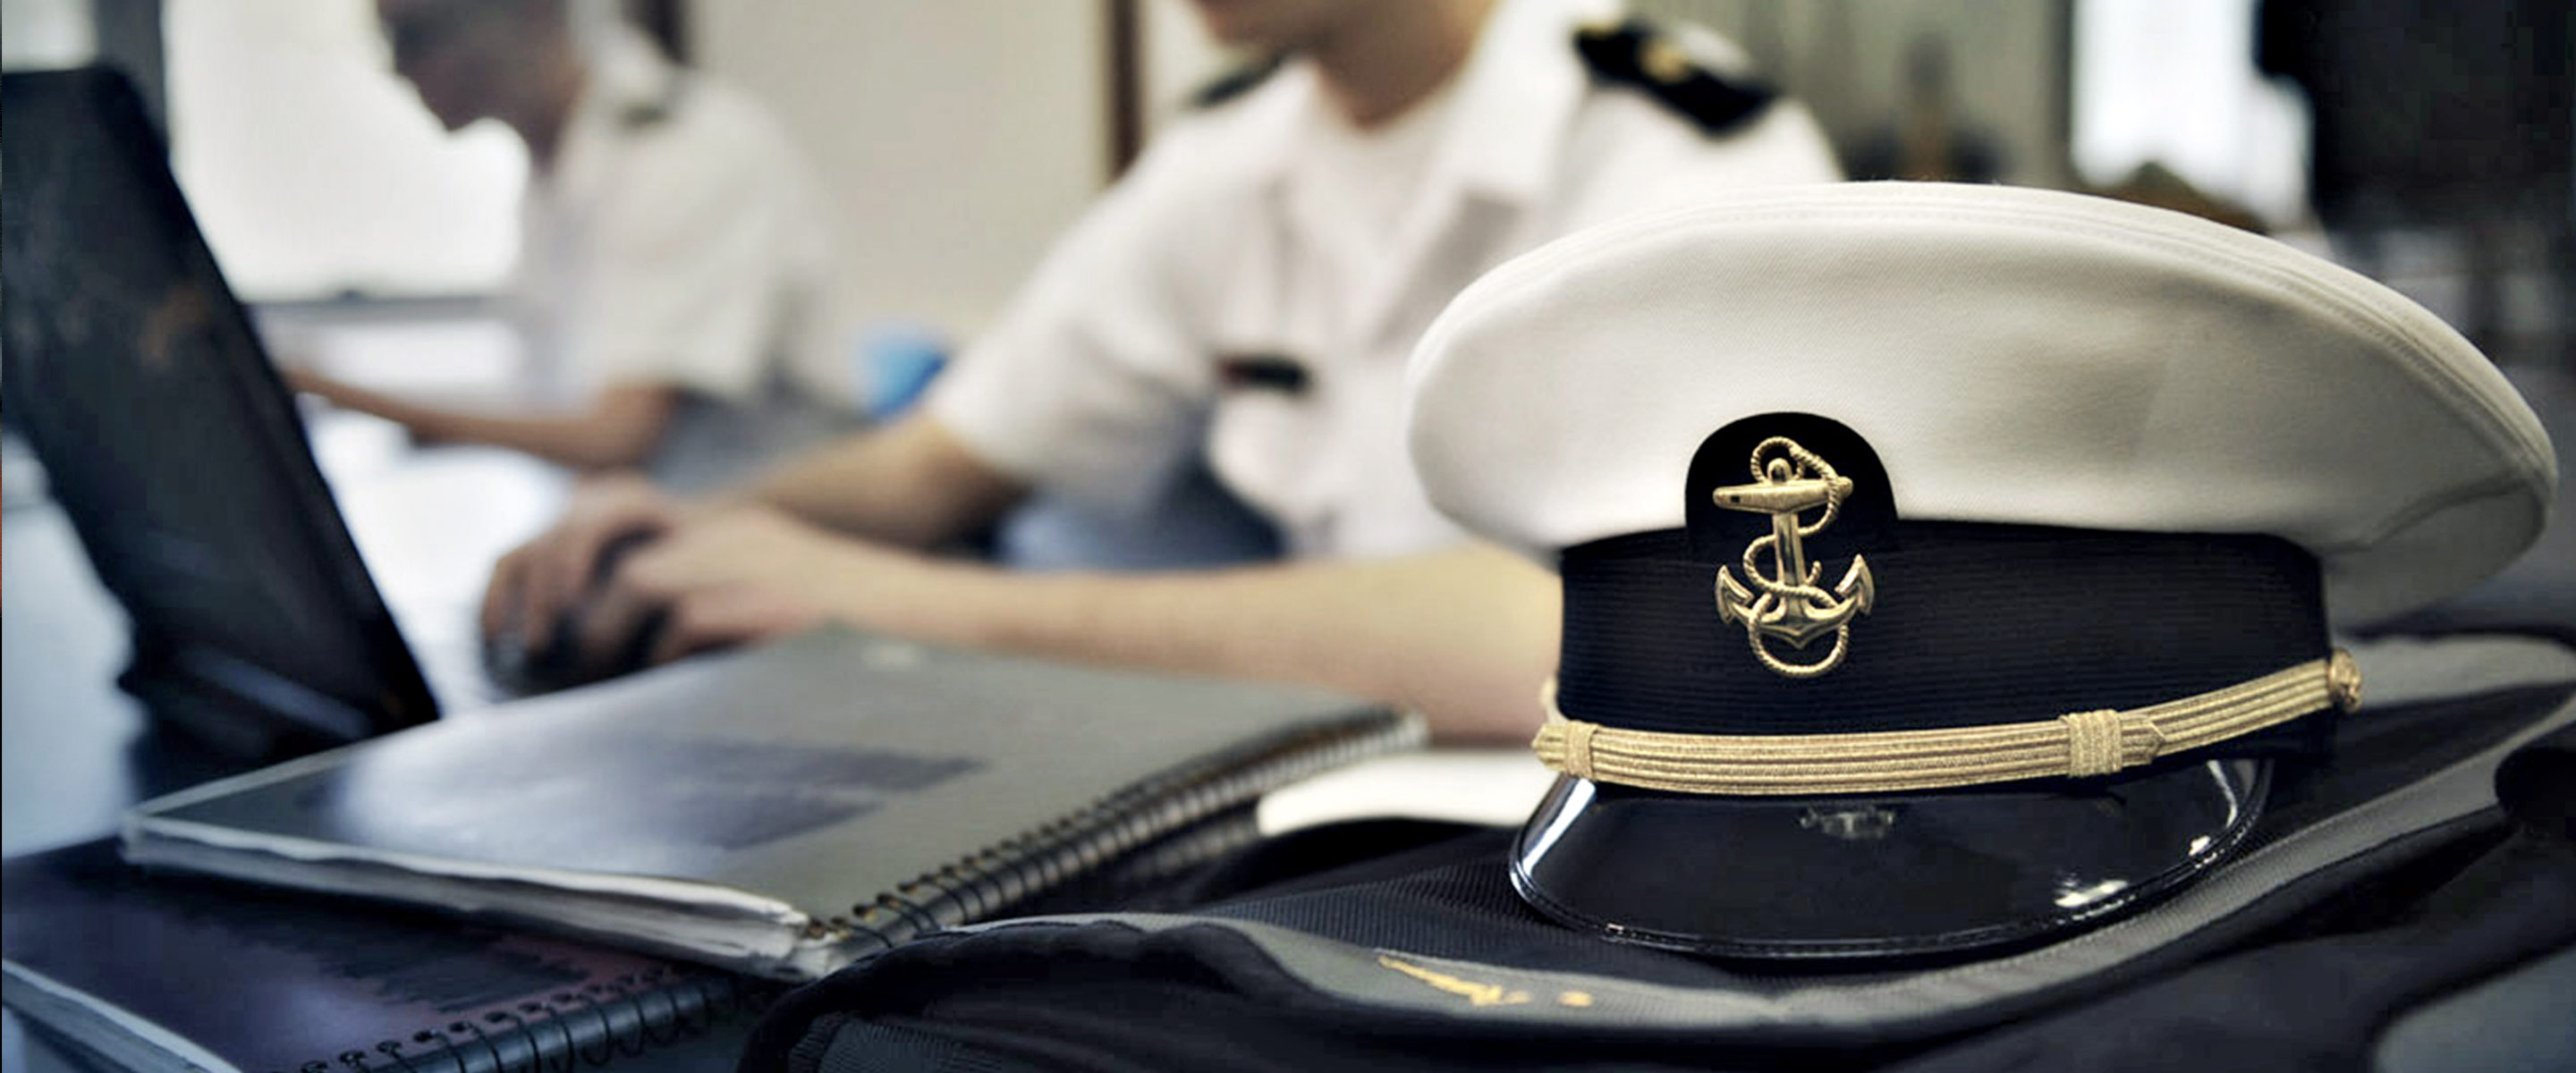 A U.S. Navy Officer's cap sits on a table with notebooks in the foreground while Sailors participate in an undergraduate college class.